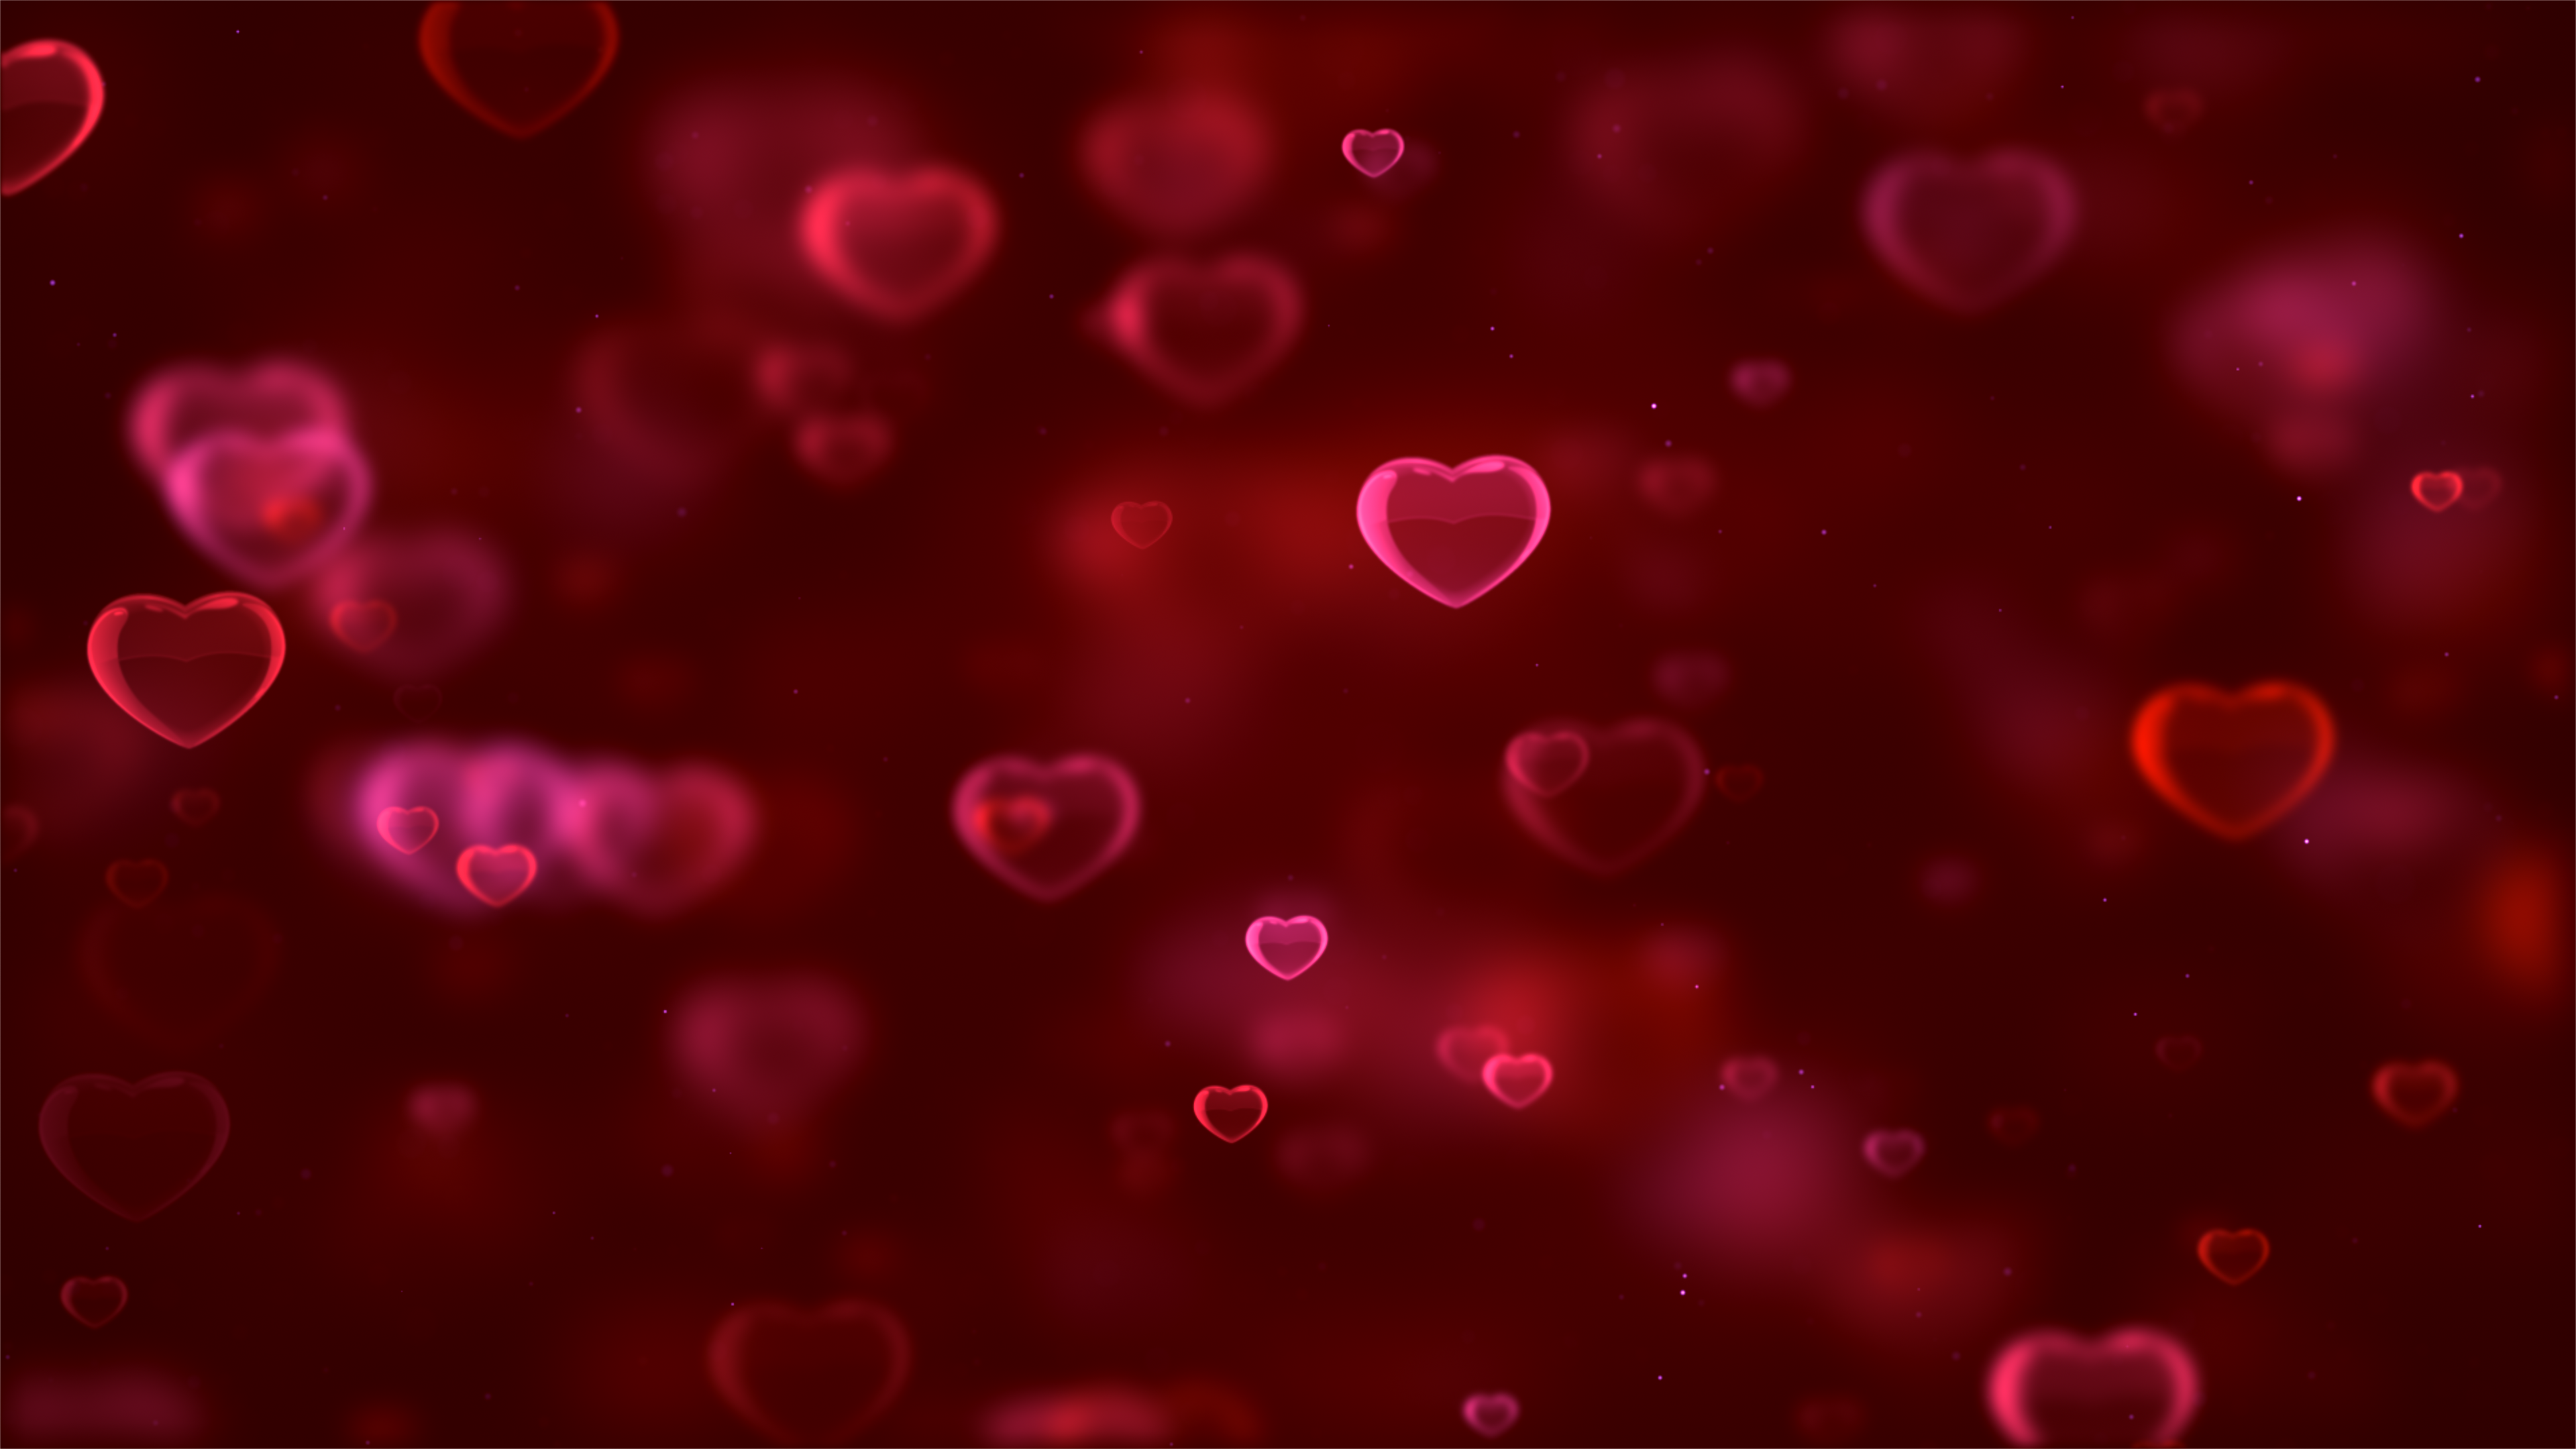 https://4kwallpapers.com/images/wallpapers/red-hearts-bokeh-red-background-blurred-digital-art-heart-3840x2160-4623.png